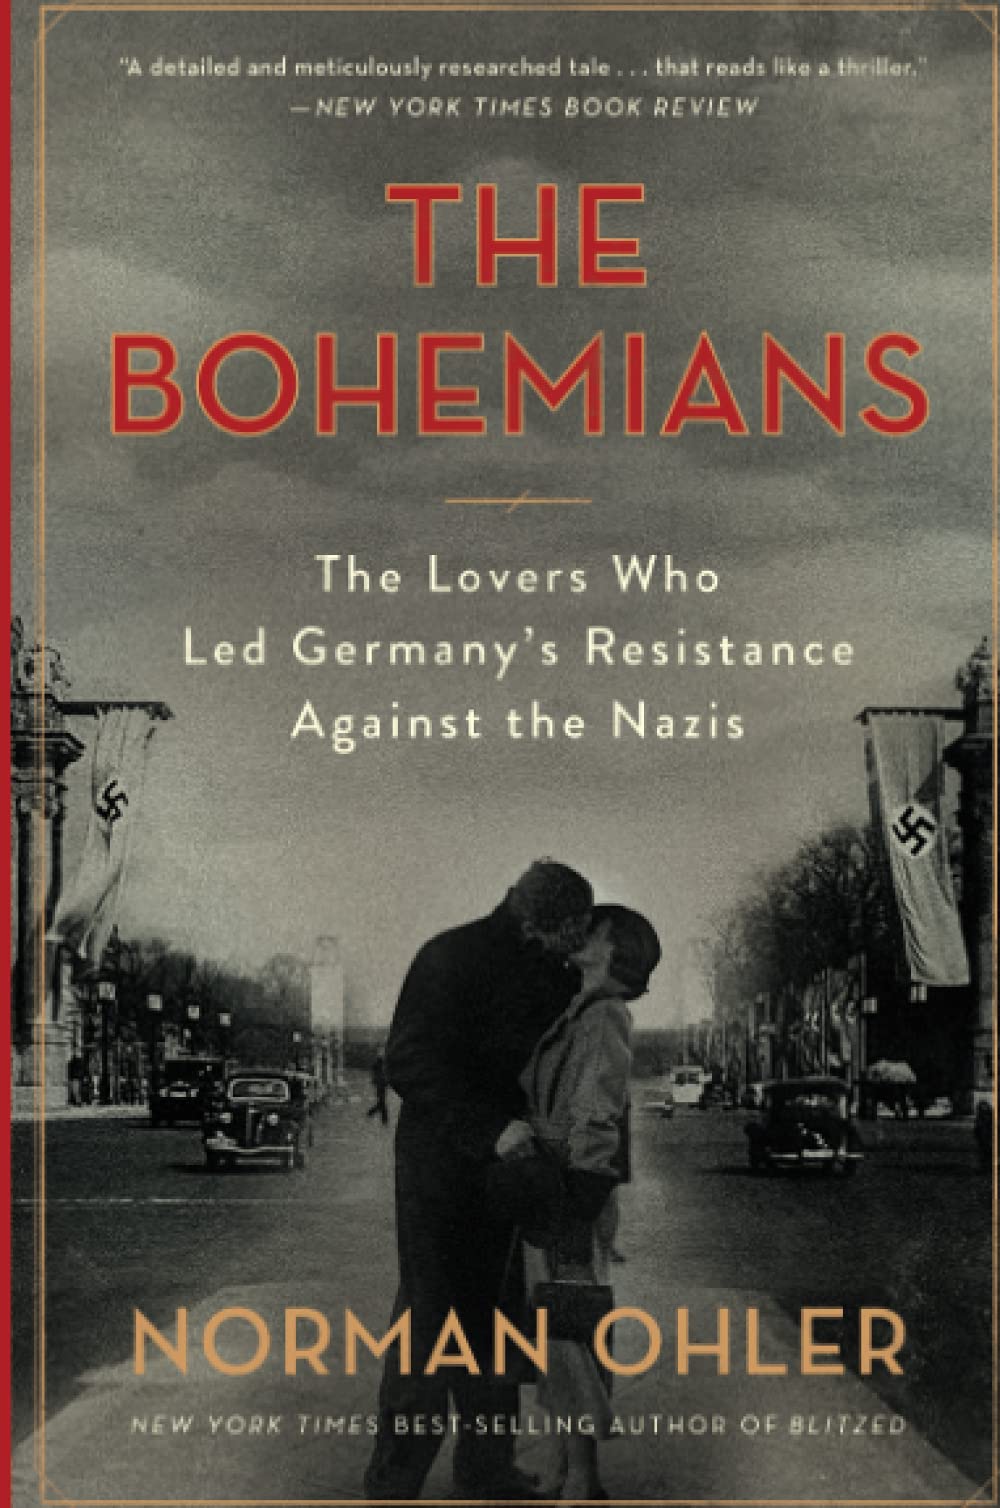 THE BOHEMIANS: THE LOVERS WHO LED GERMANY'S RESISTANCE AGAINST THE NAZIS - Norman Ohler